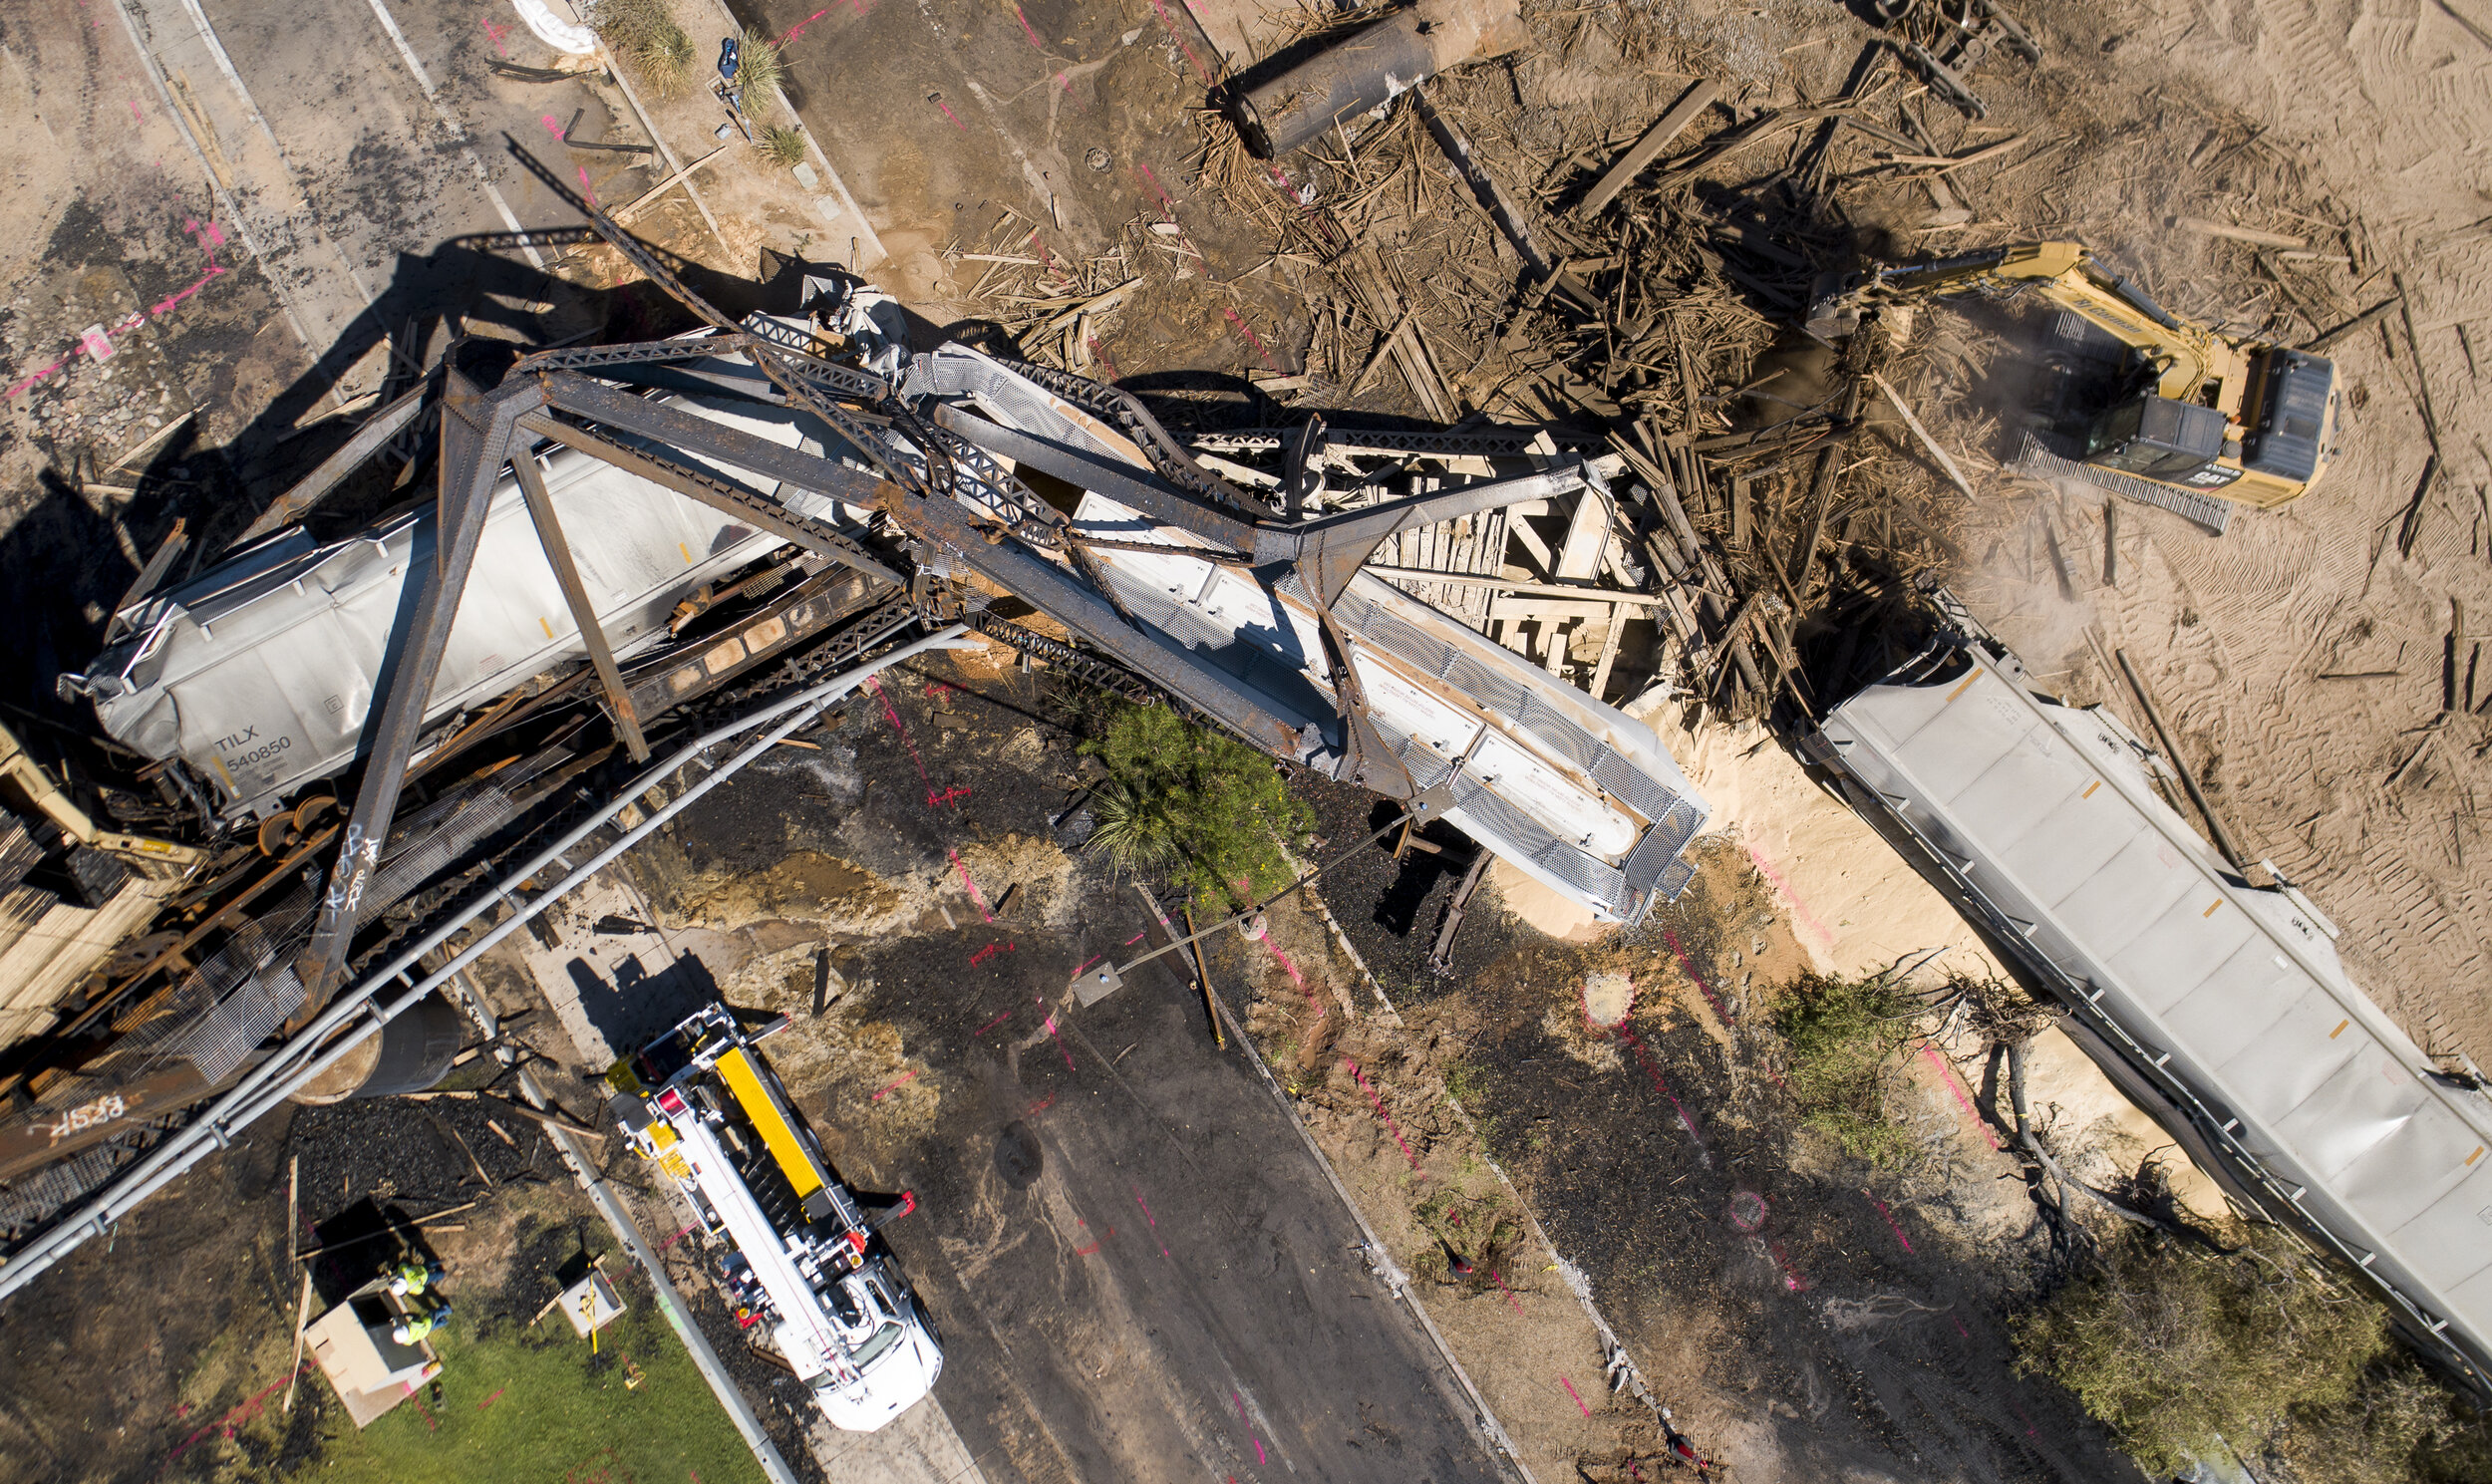  An aerial of the scene of a train derailment and bridge collapse at Tempe Town Lake.  